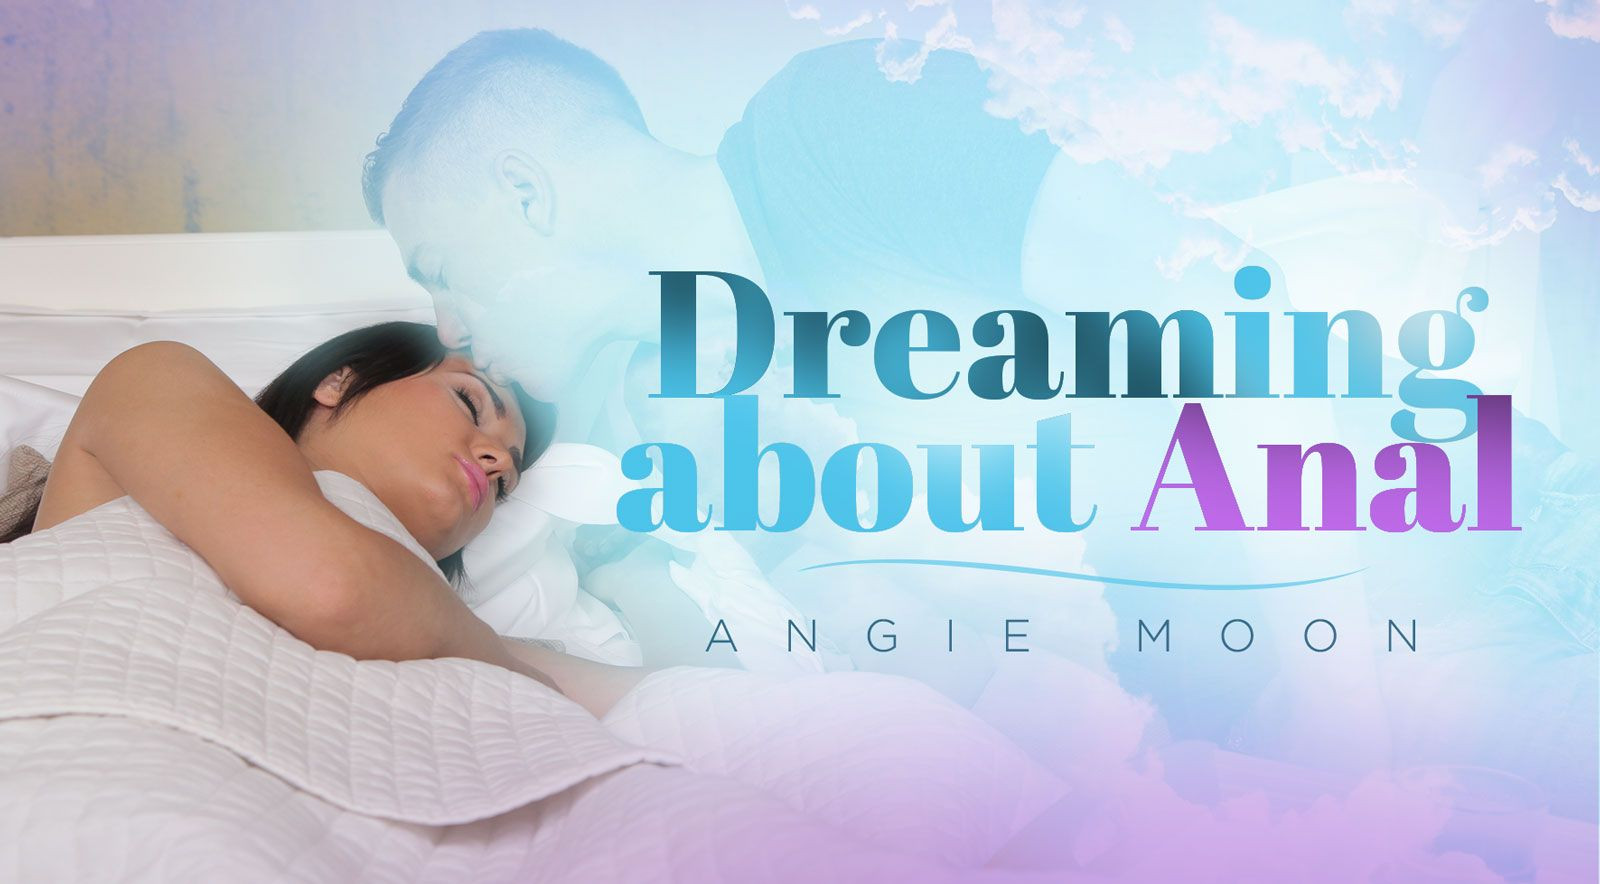 Dreaming about anal: Angie Moon Slideshow